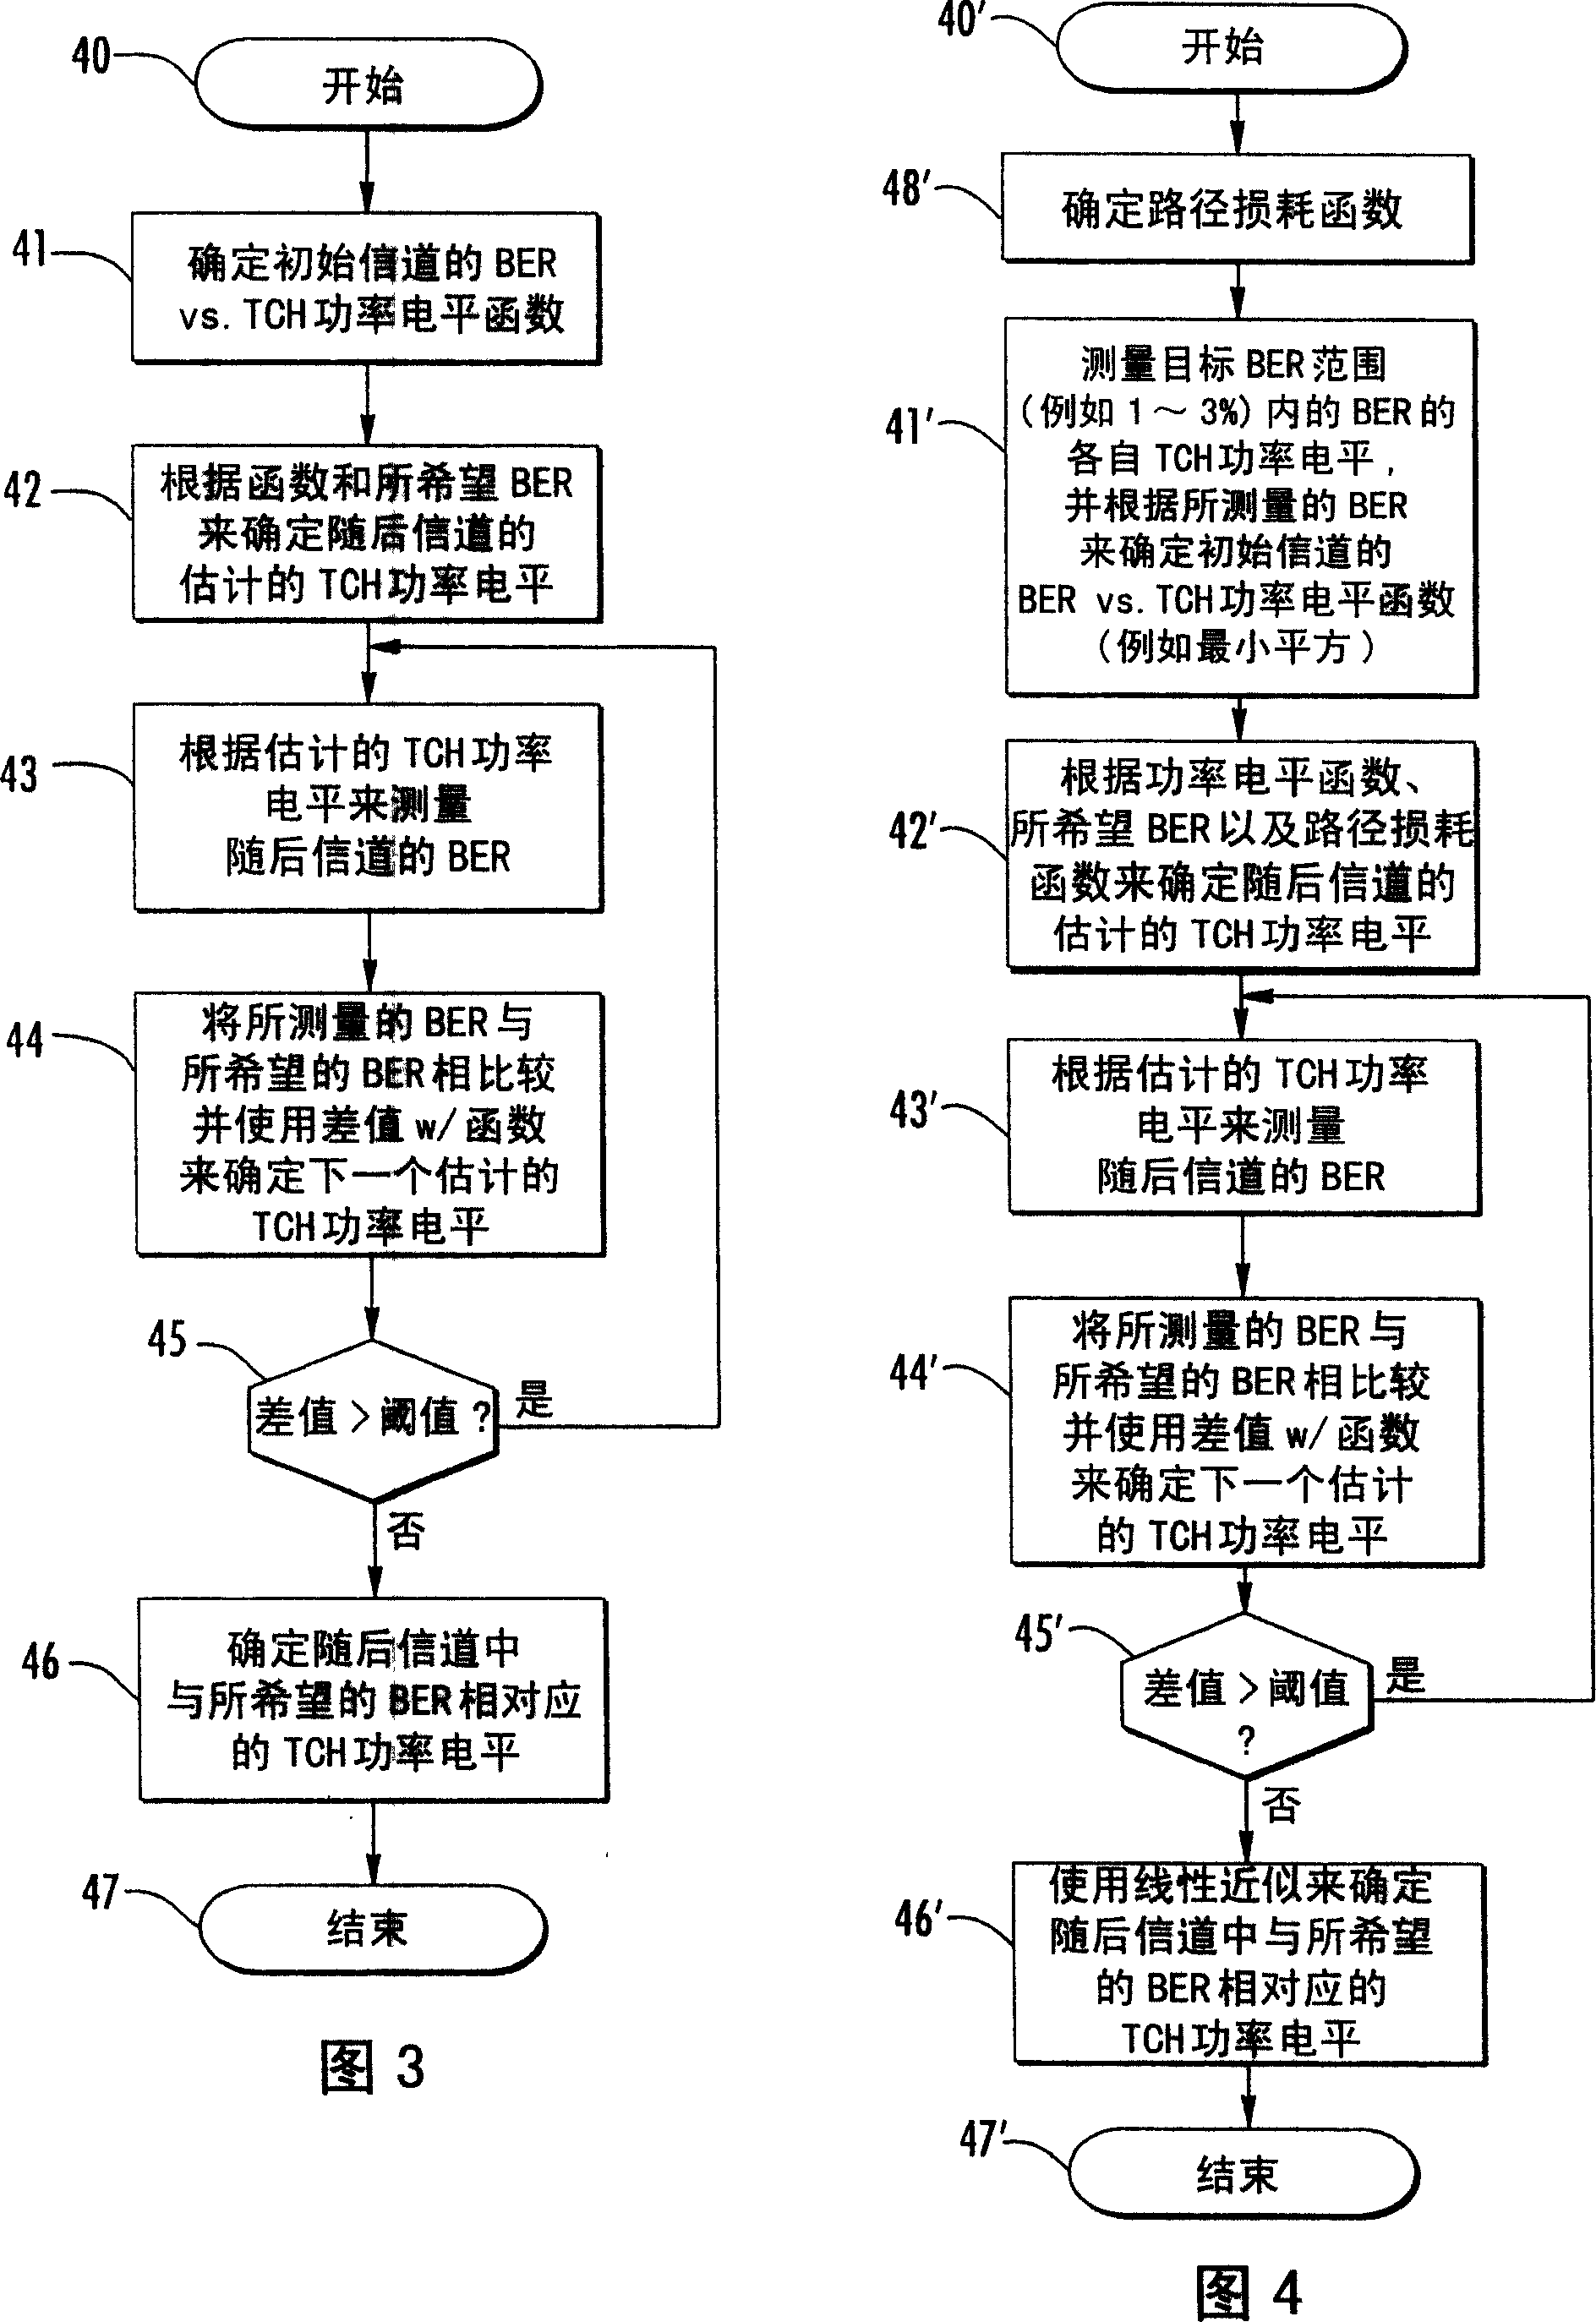 System for determining RF path loss between an RF source andan RF receiver and related methods